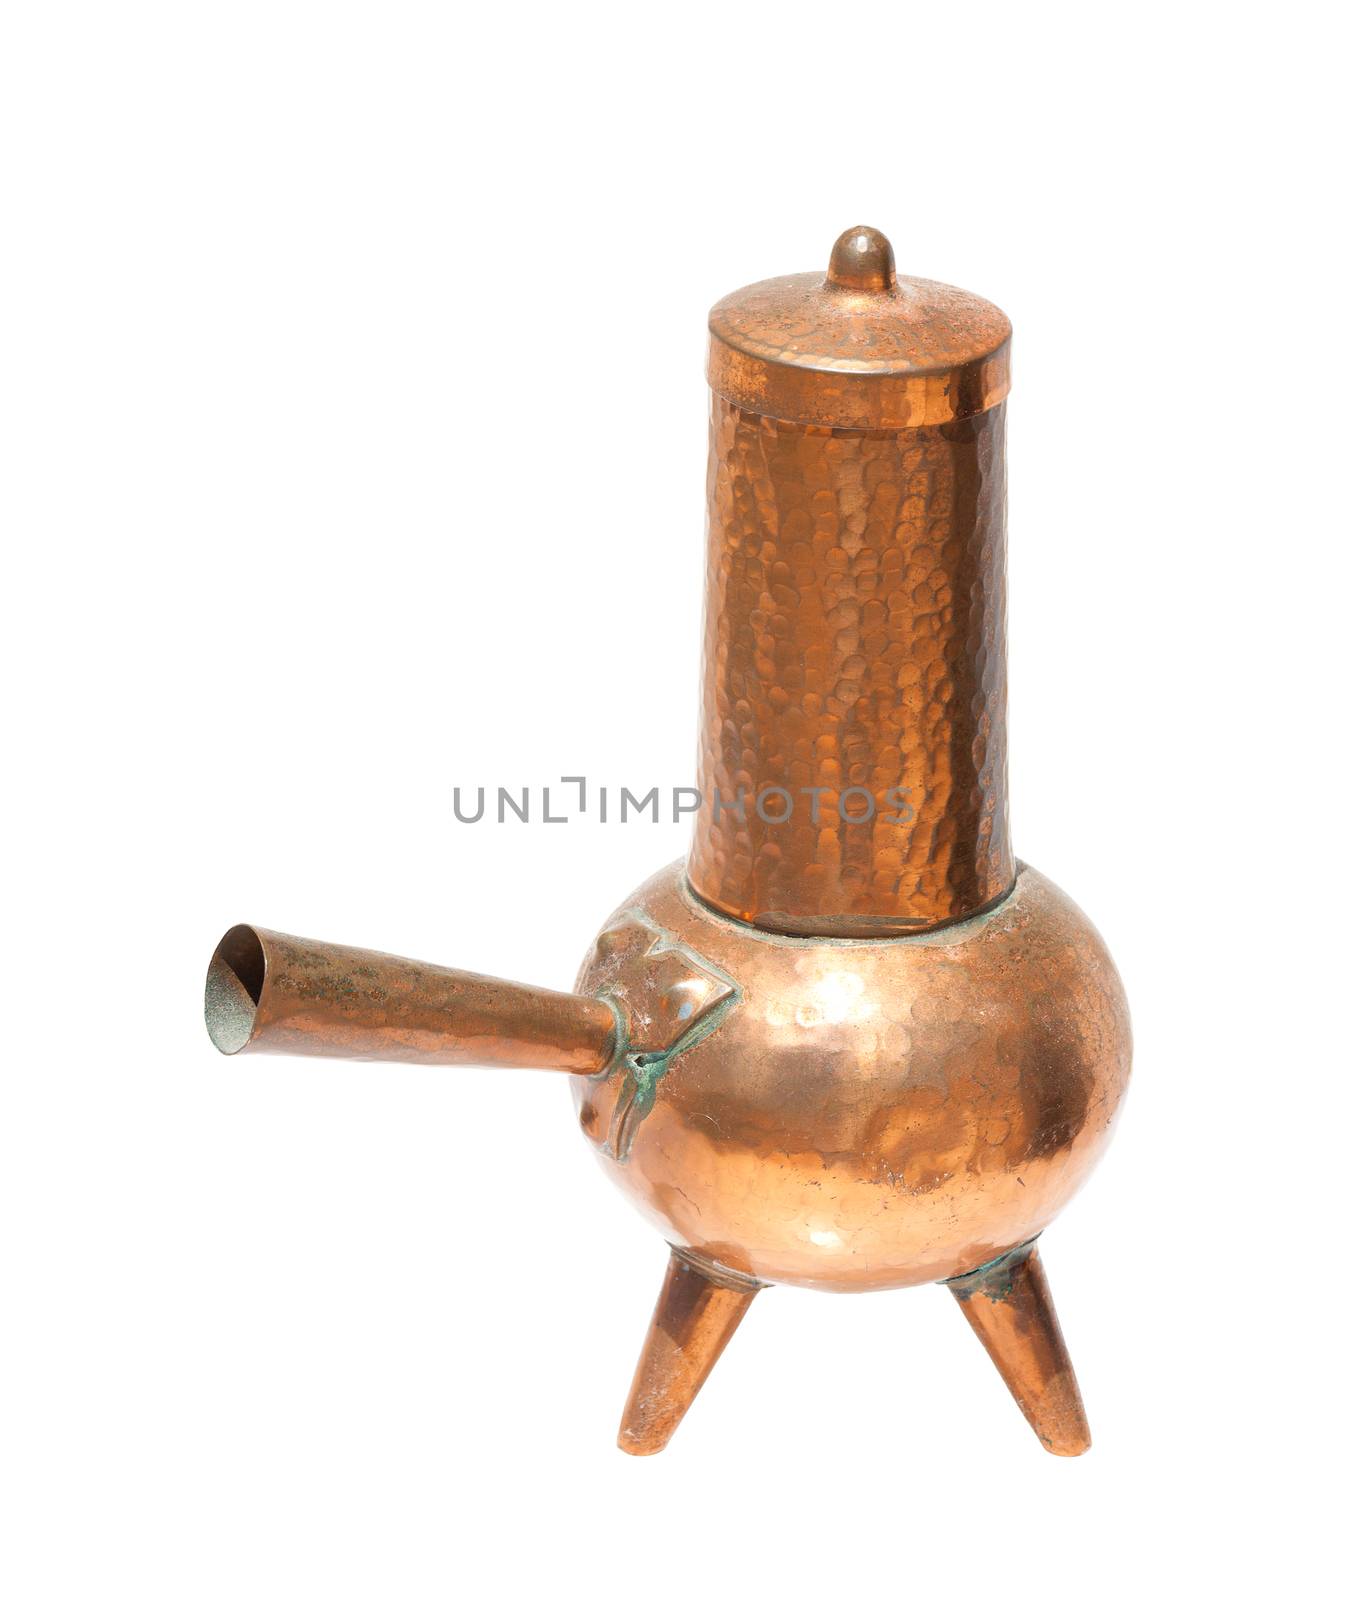 Antique copper coffeepot, closeup isolated on white background